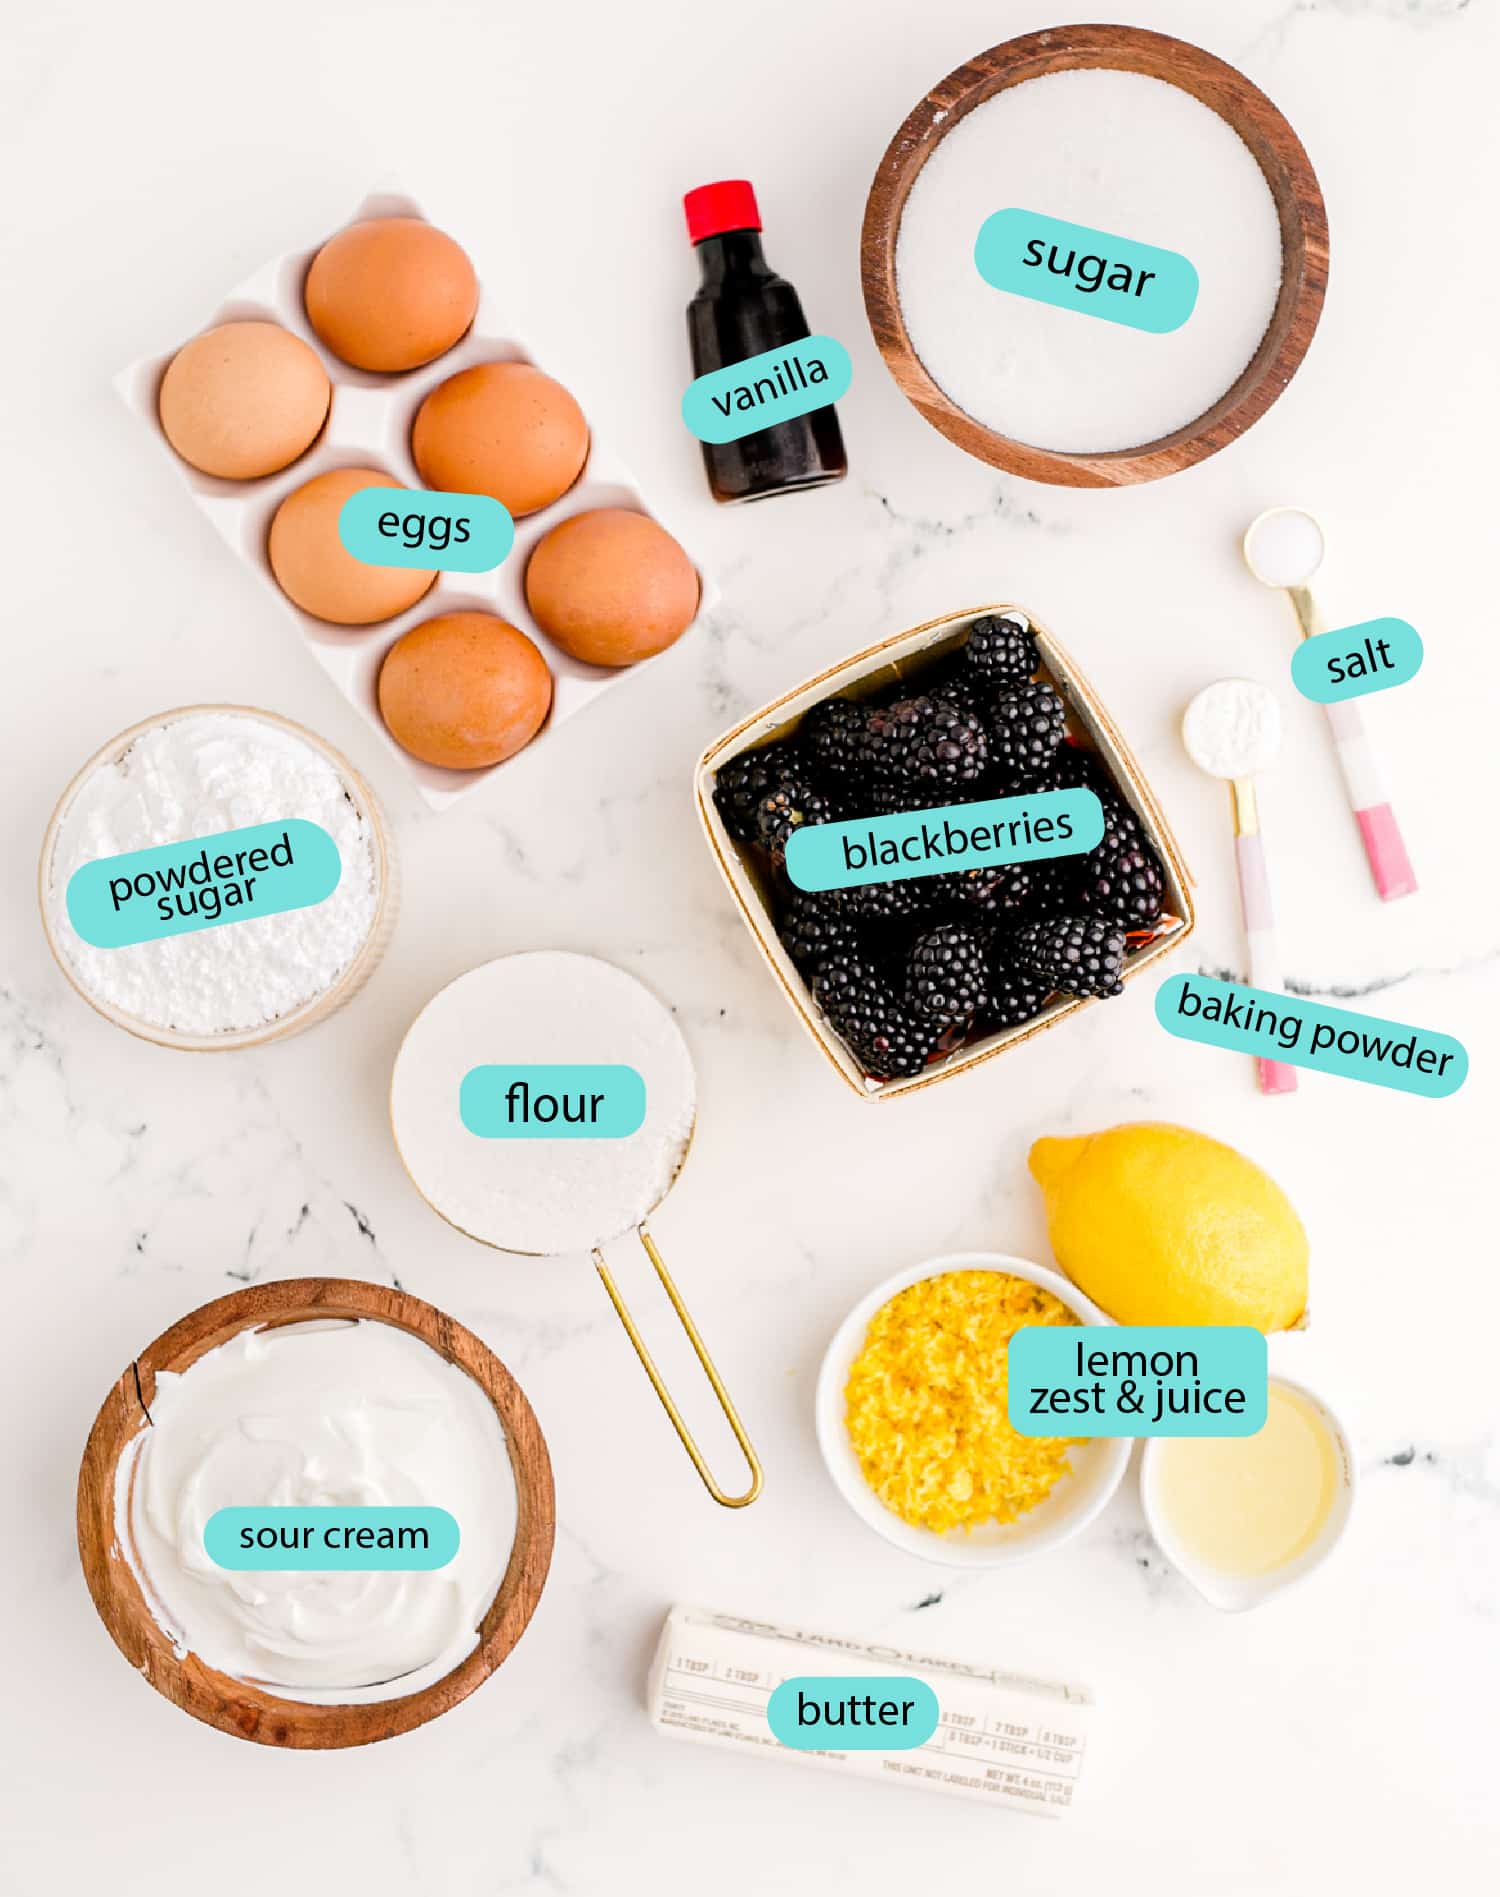 Labeled ingredients used to make blackberry lemon bread laid out on a marble counter top.